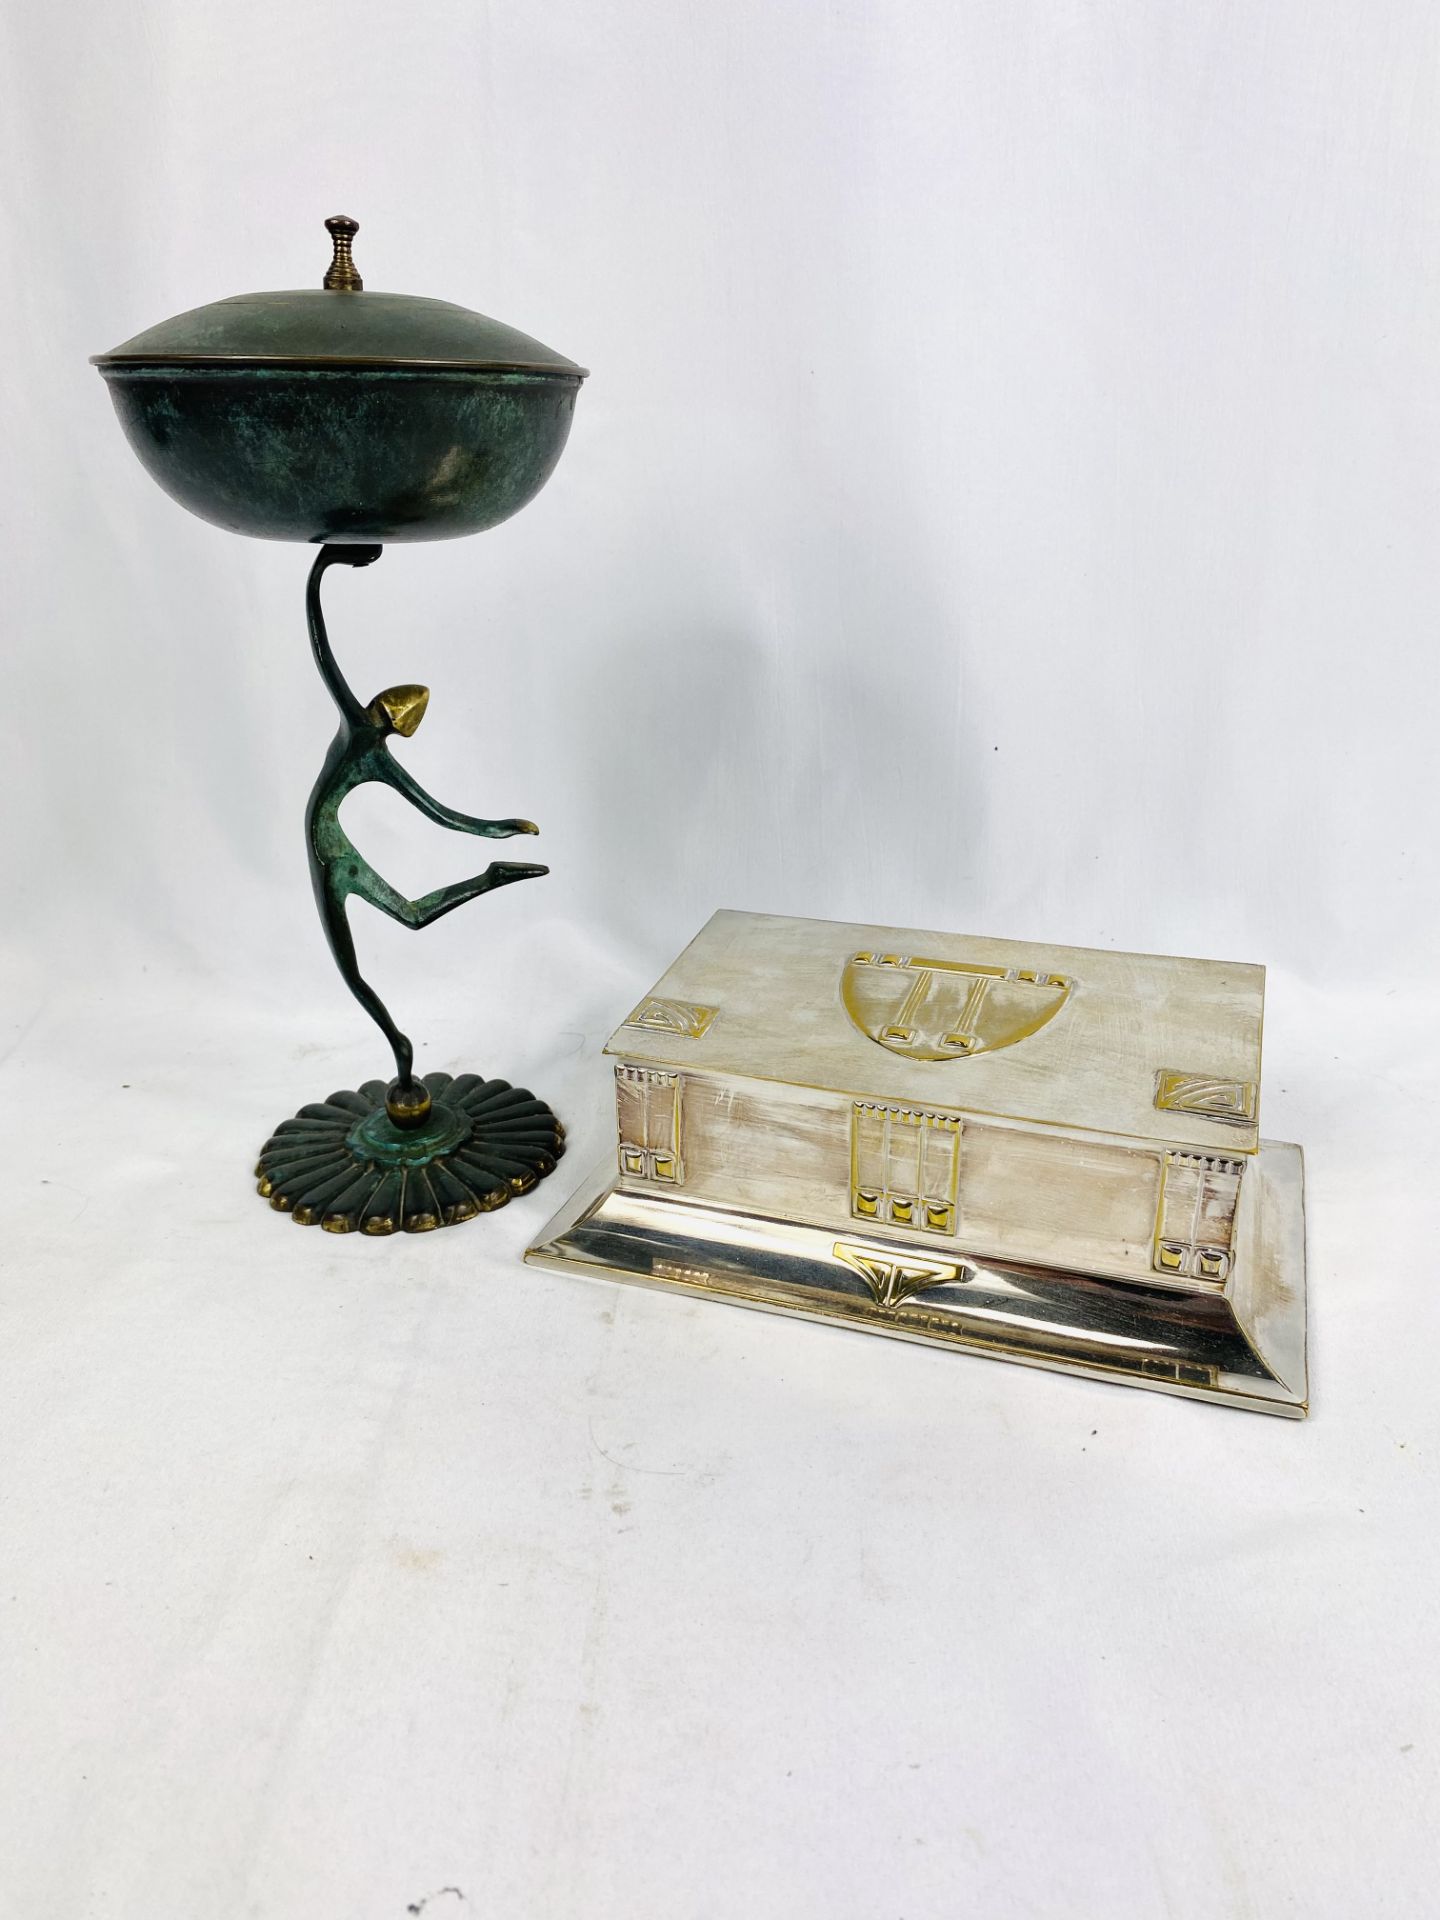 Silver plate cigarette box together with an art deco style figurine